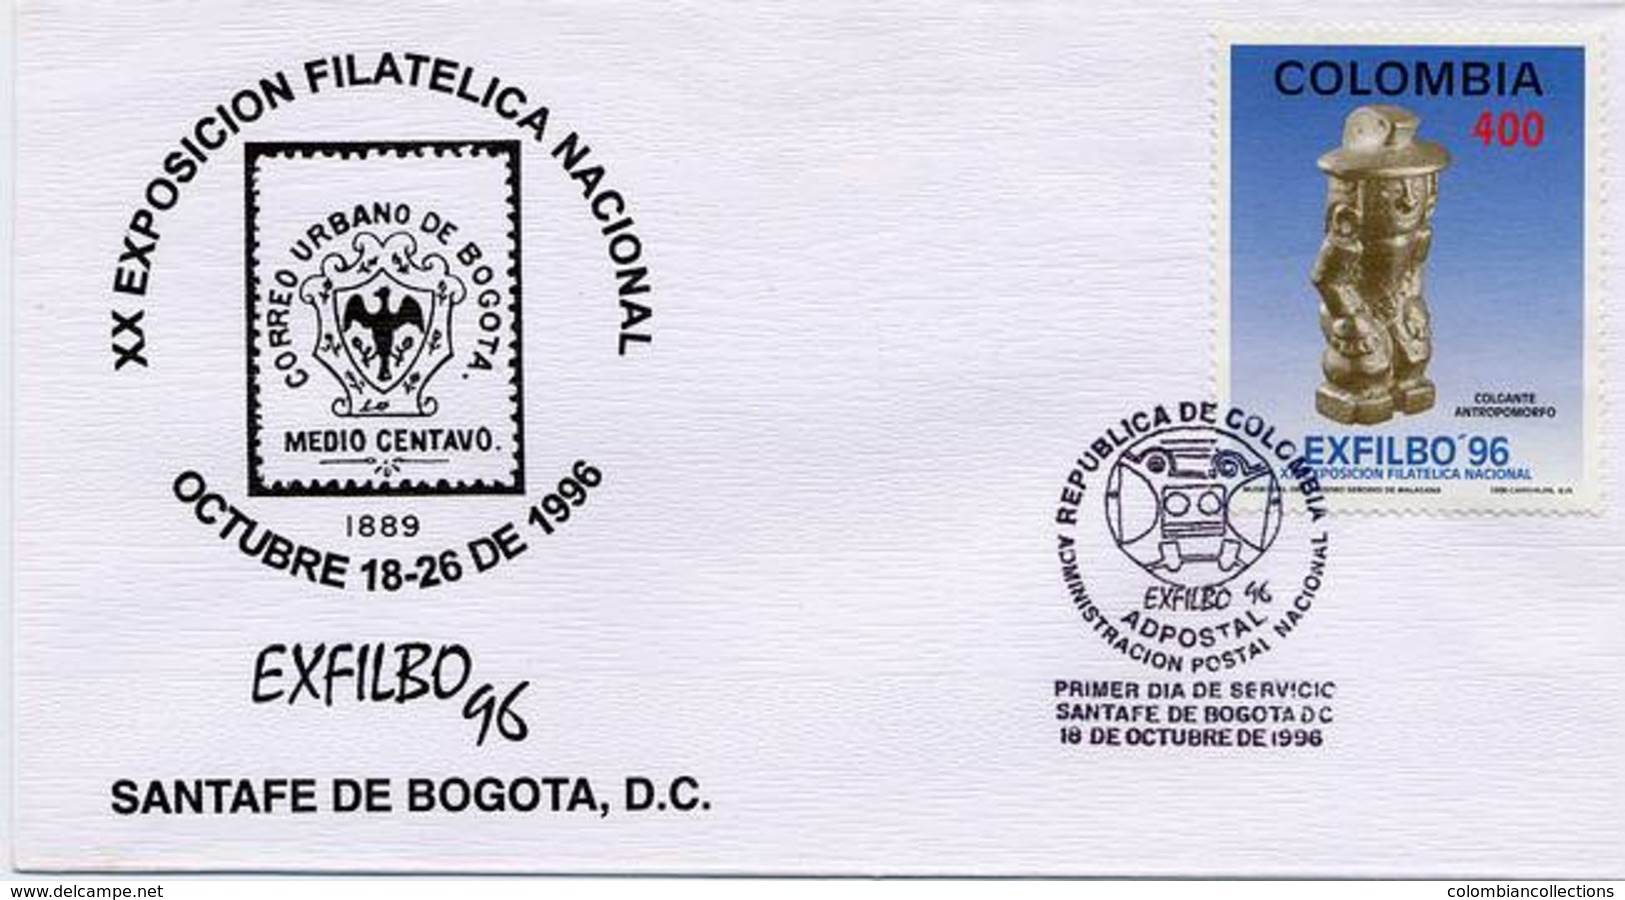 Lote 2044F, Colombia, 1996, SPD-FDC, Exfilbo, Indigenous Theme - Colombia